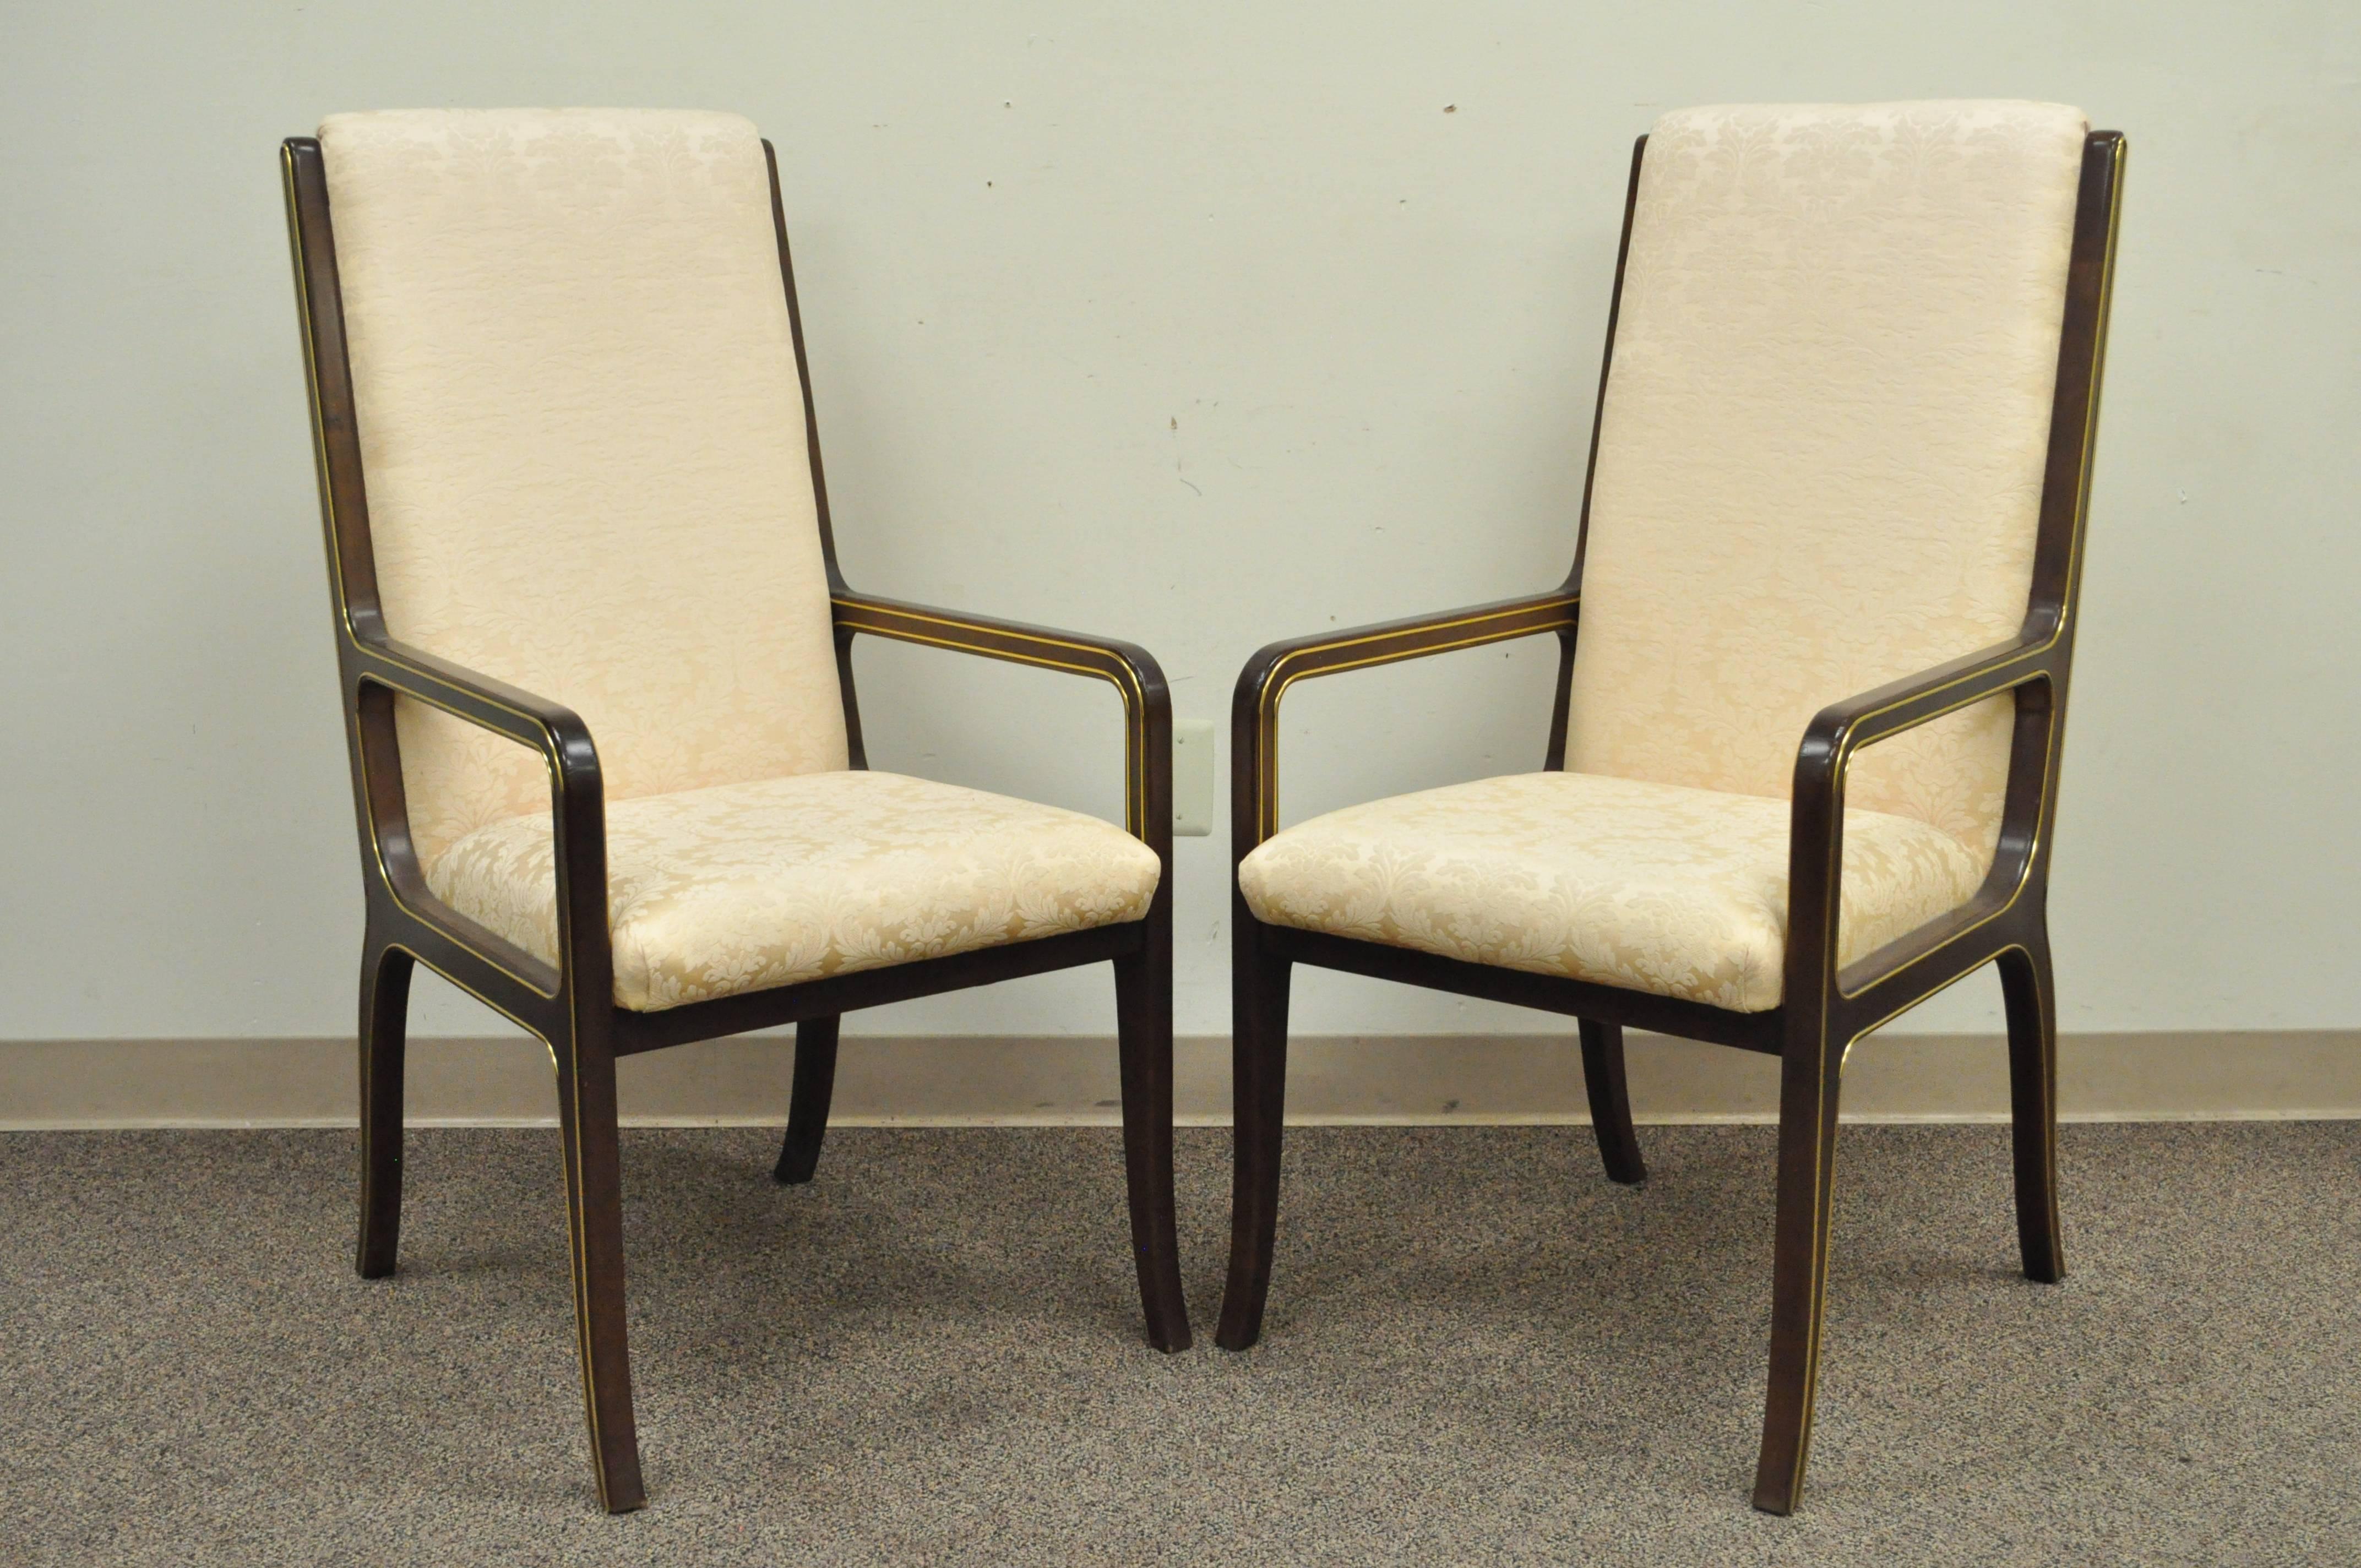 Set of eight high quality Mastercraft for Baker Furniture Co. Mid-Century modernist dining chairs. Set consists of two armchairs and six side chairs. Each chair features sculptural solid wood frames (believed to be solid mahogany) with brass inlaid